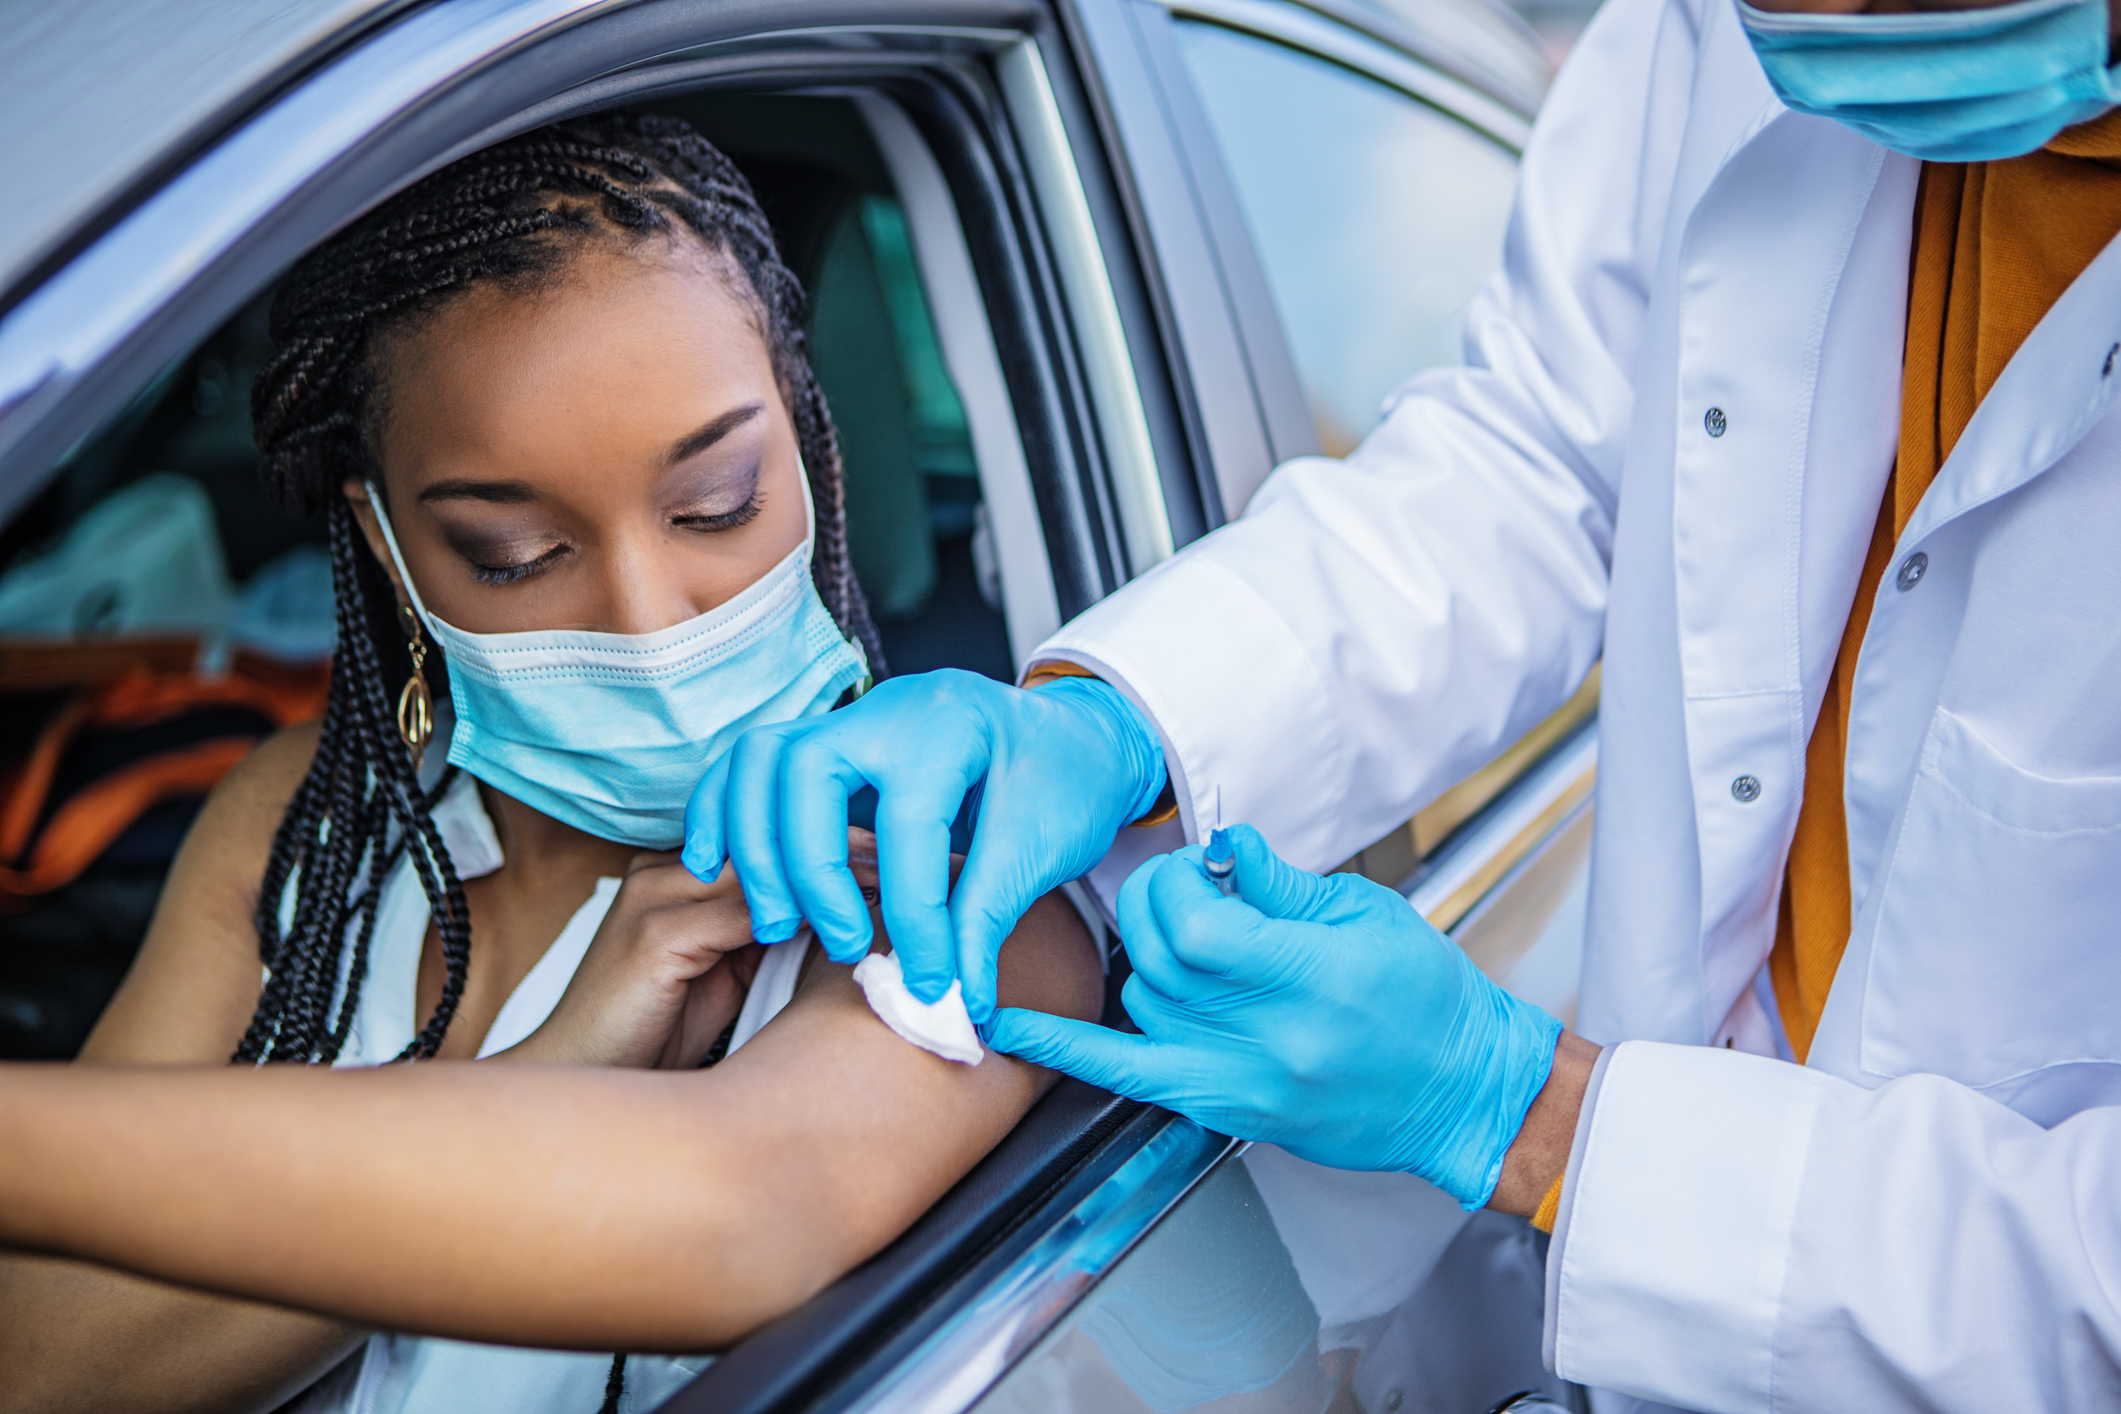 Carle Health launching drive-thru flu clinic locations starting in September